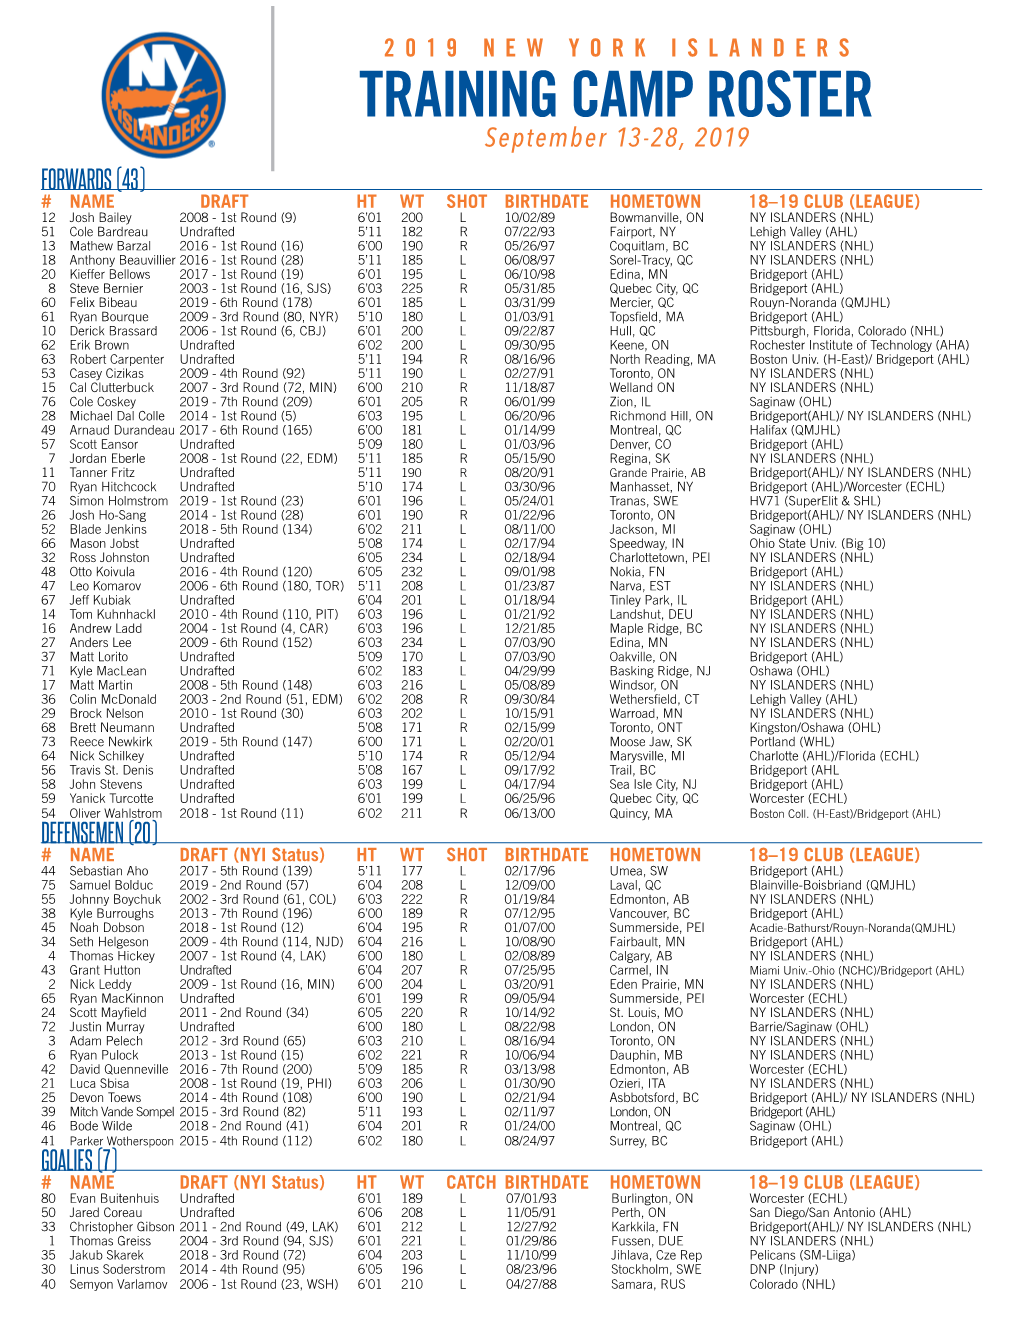 Training Camp Roster